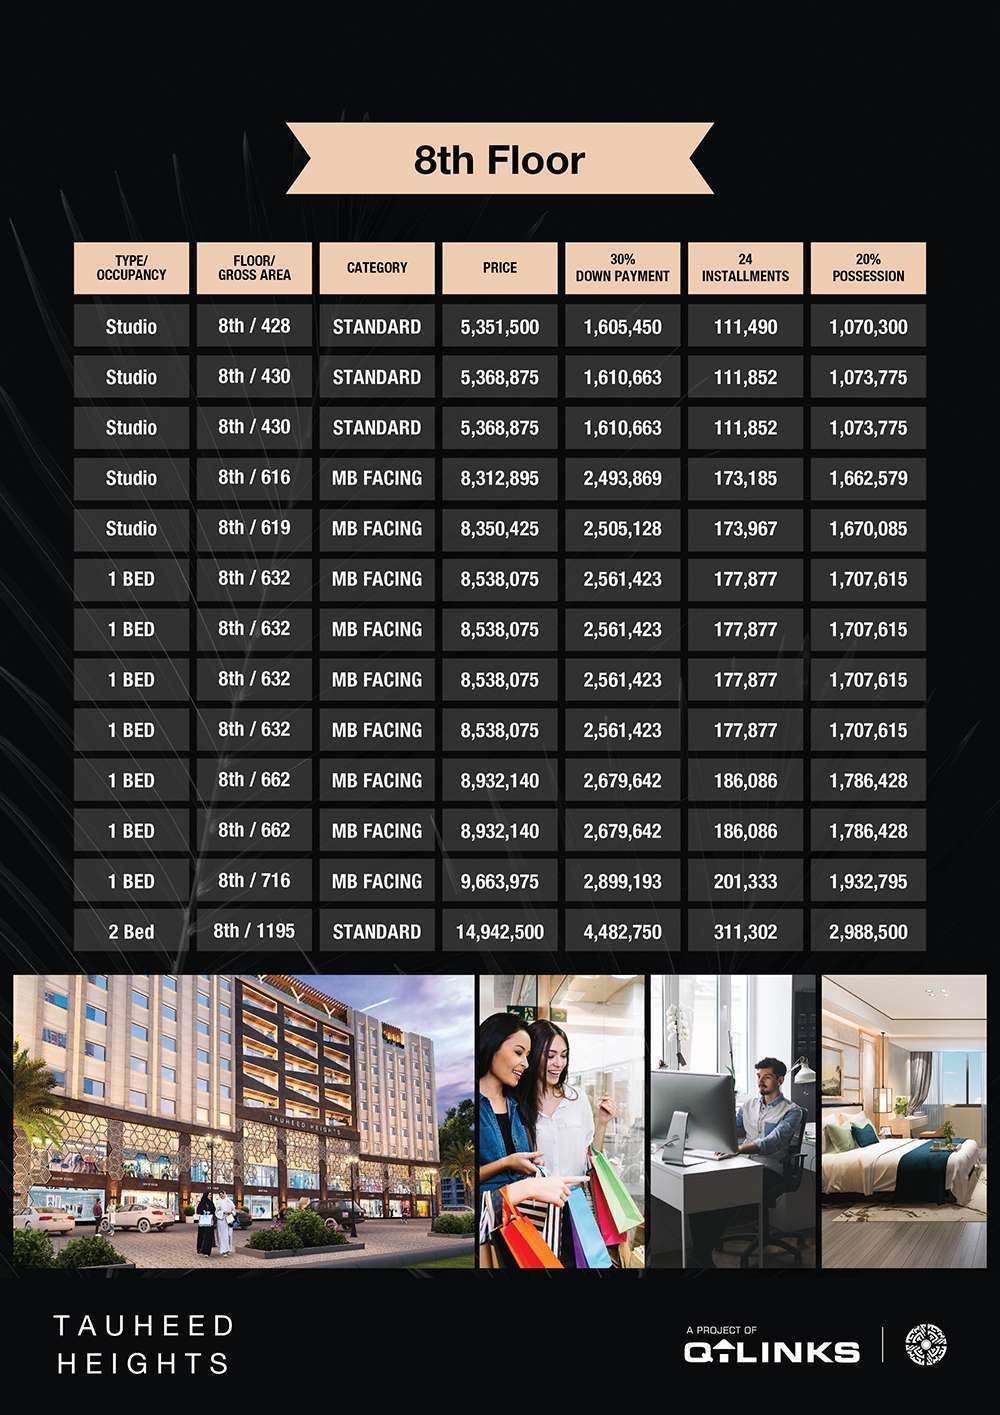 Tauheed Heights Digital Payment Plan-Front-Back